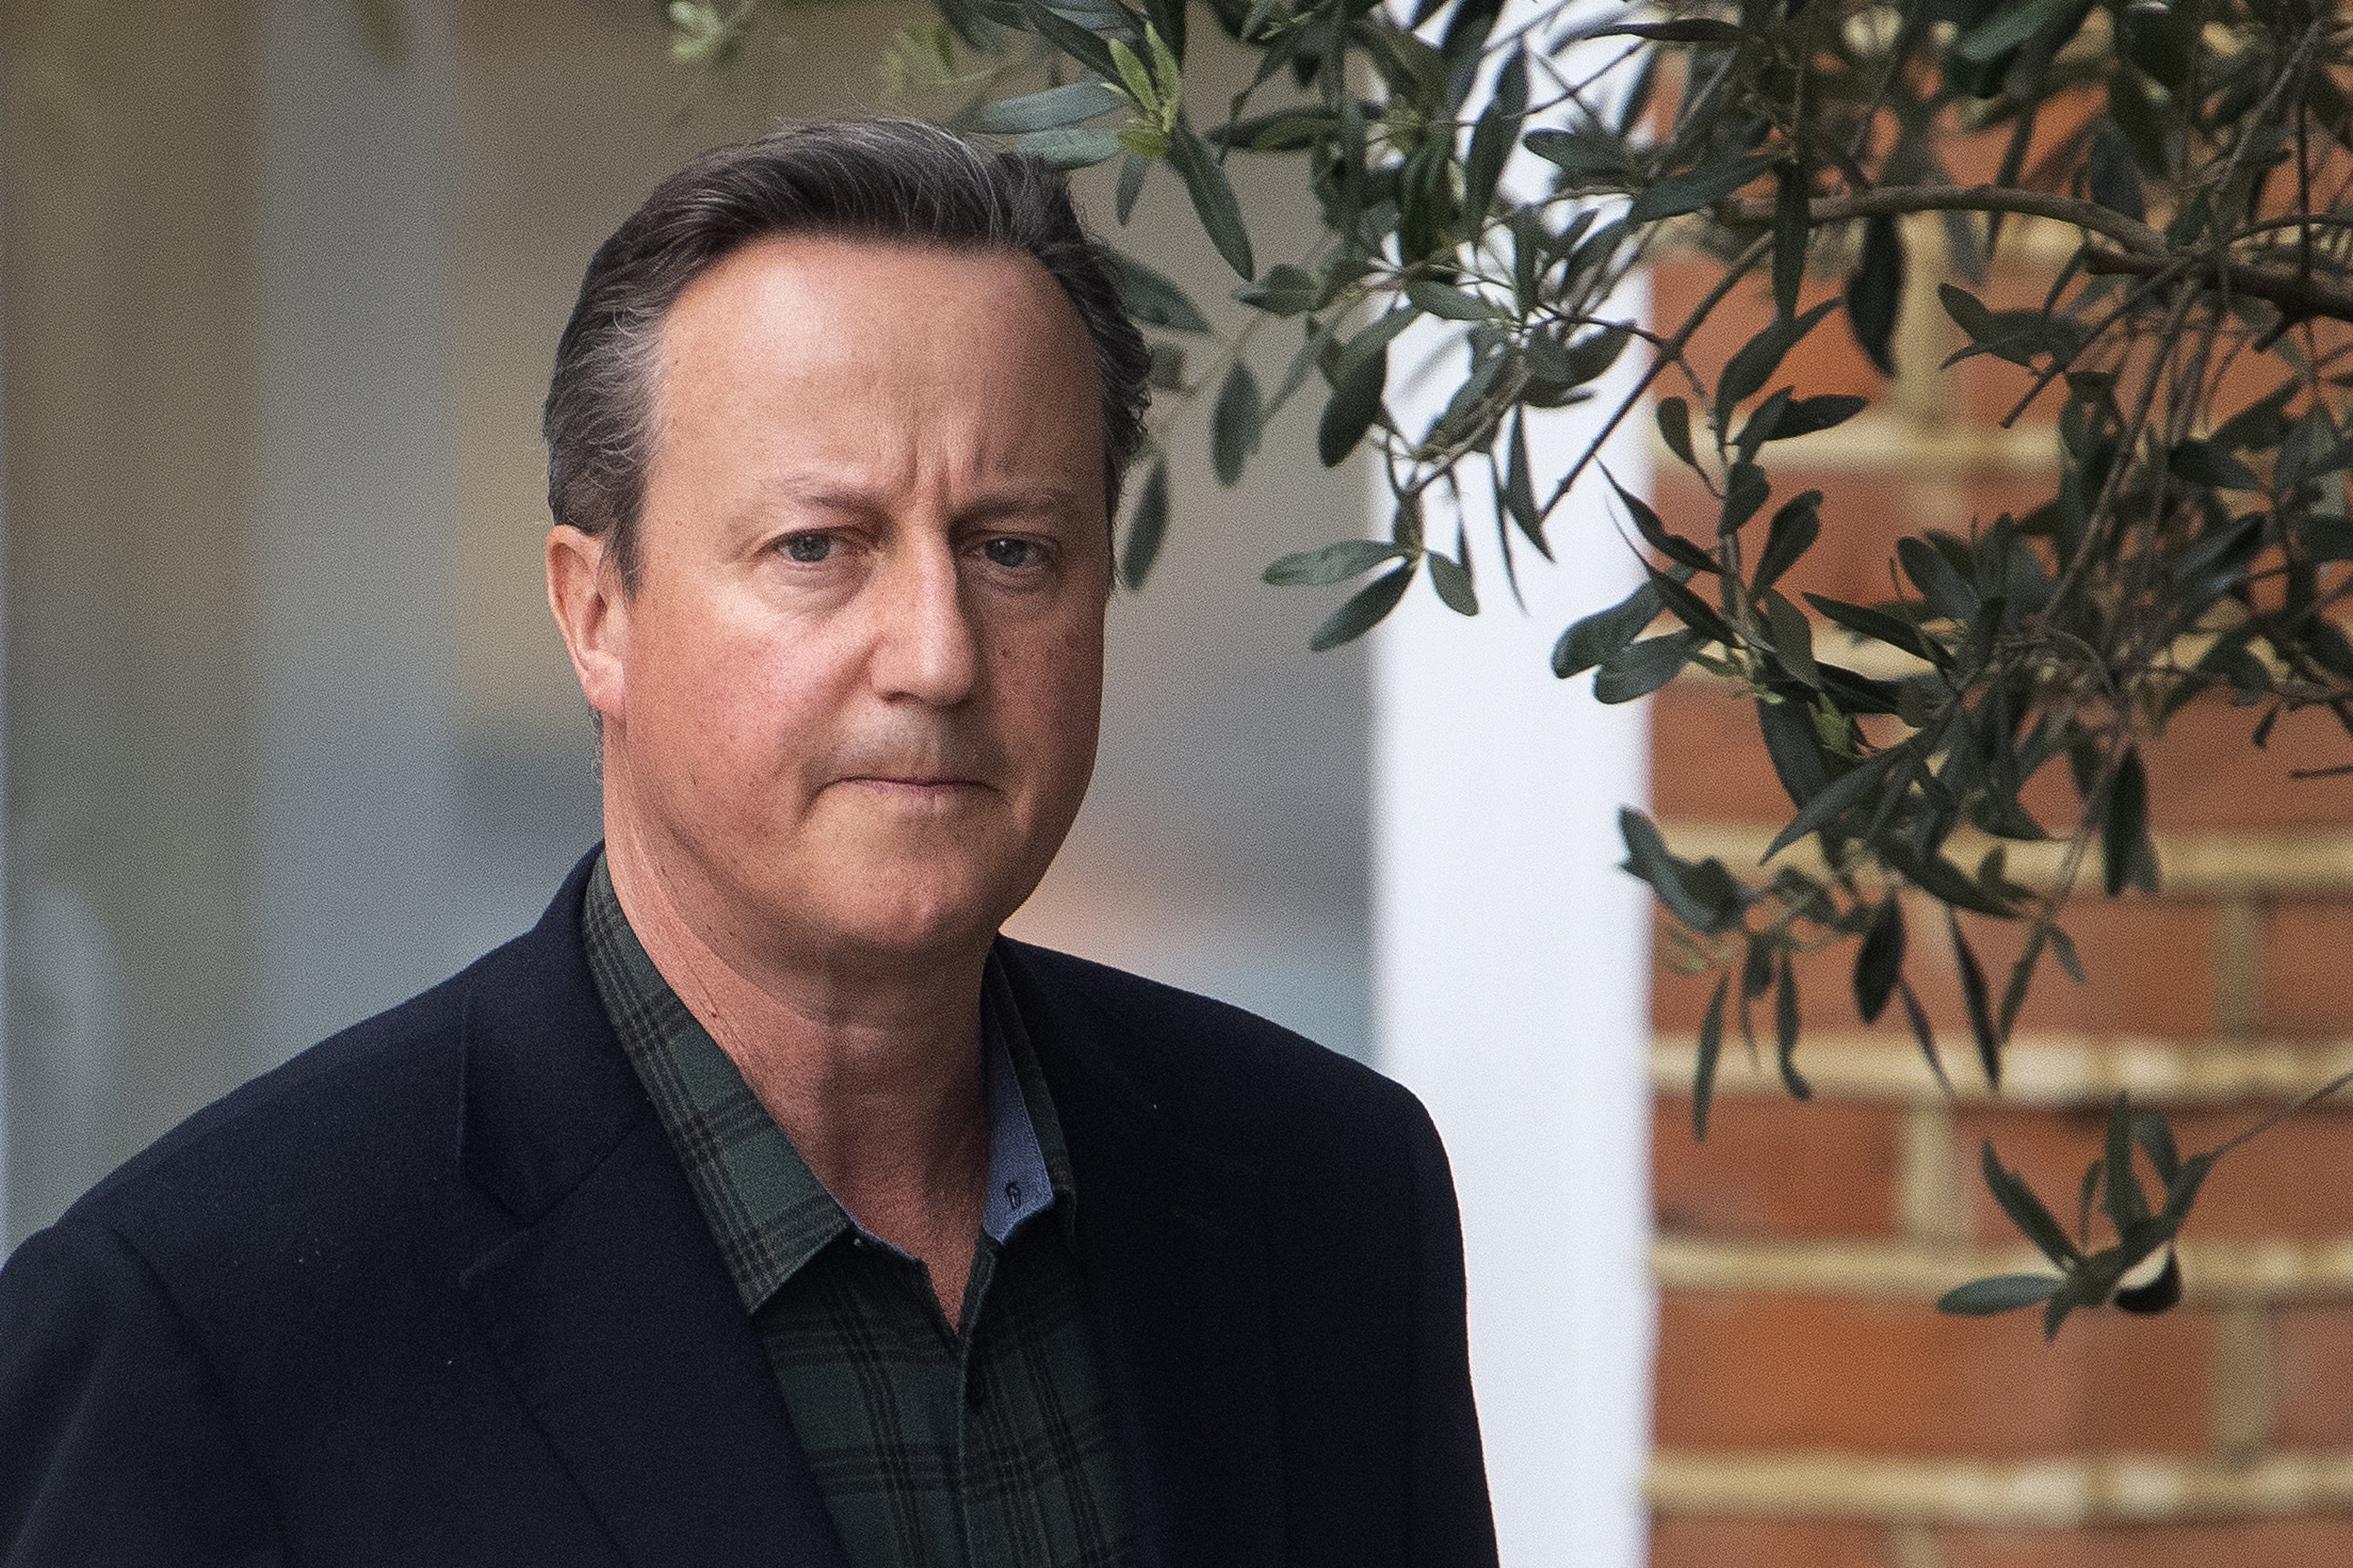 Cameron’s National Citizen Service was the subject of an investigation by The Independent